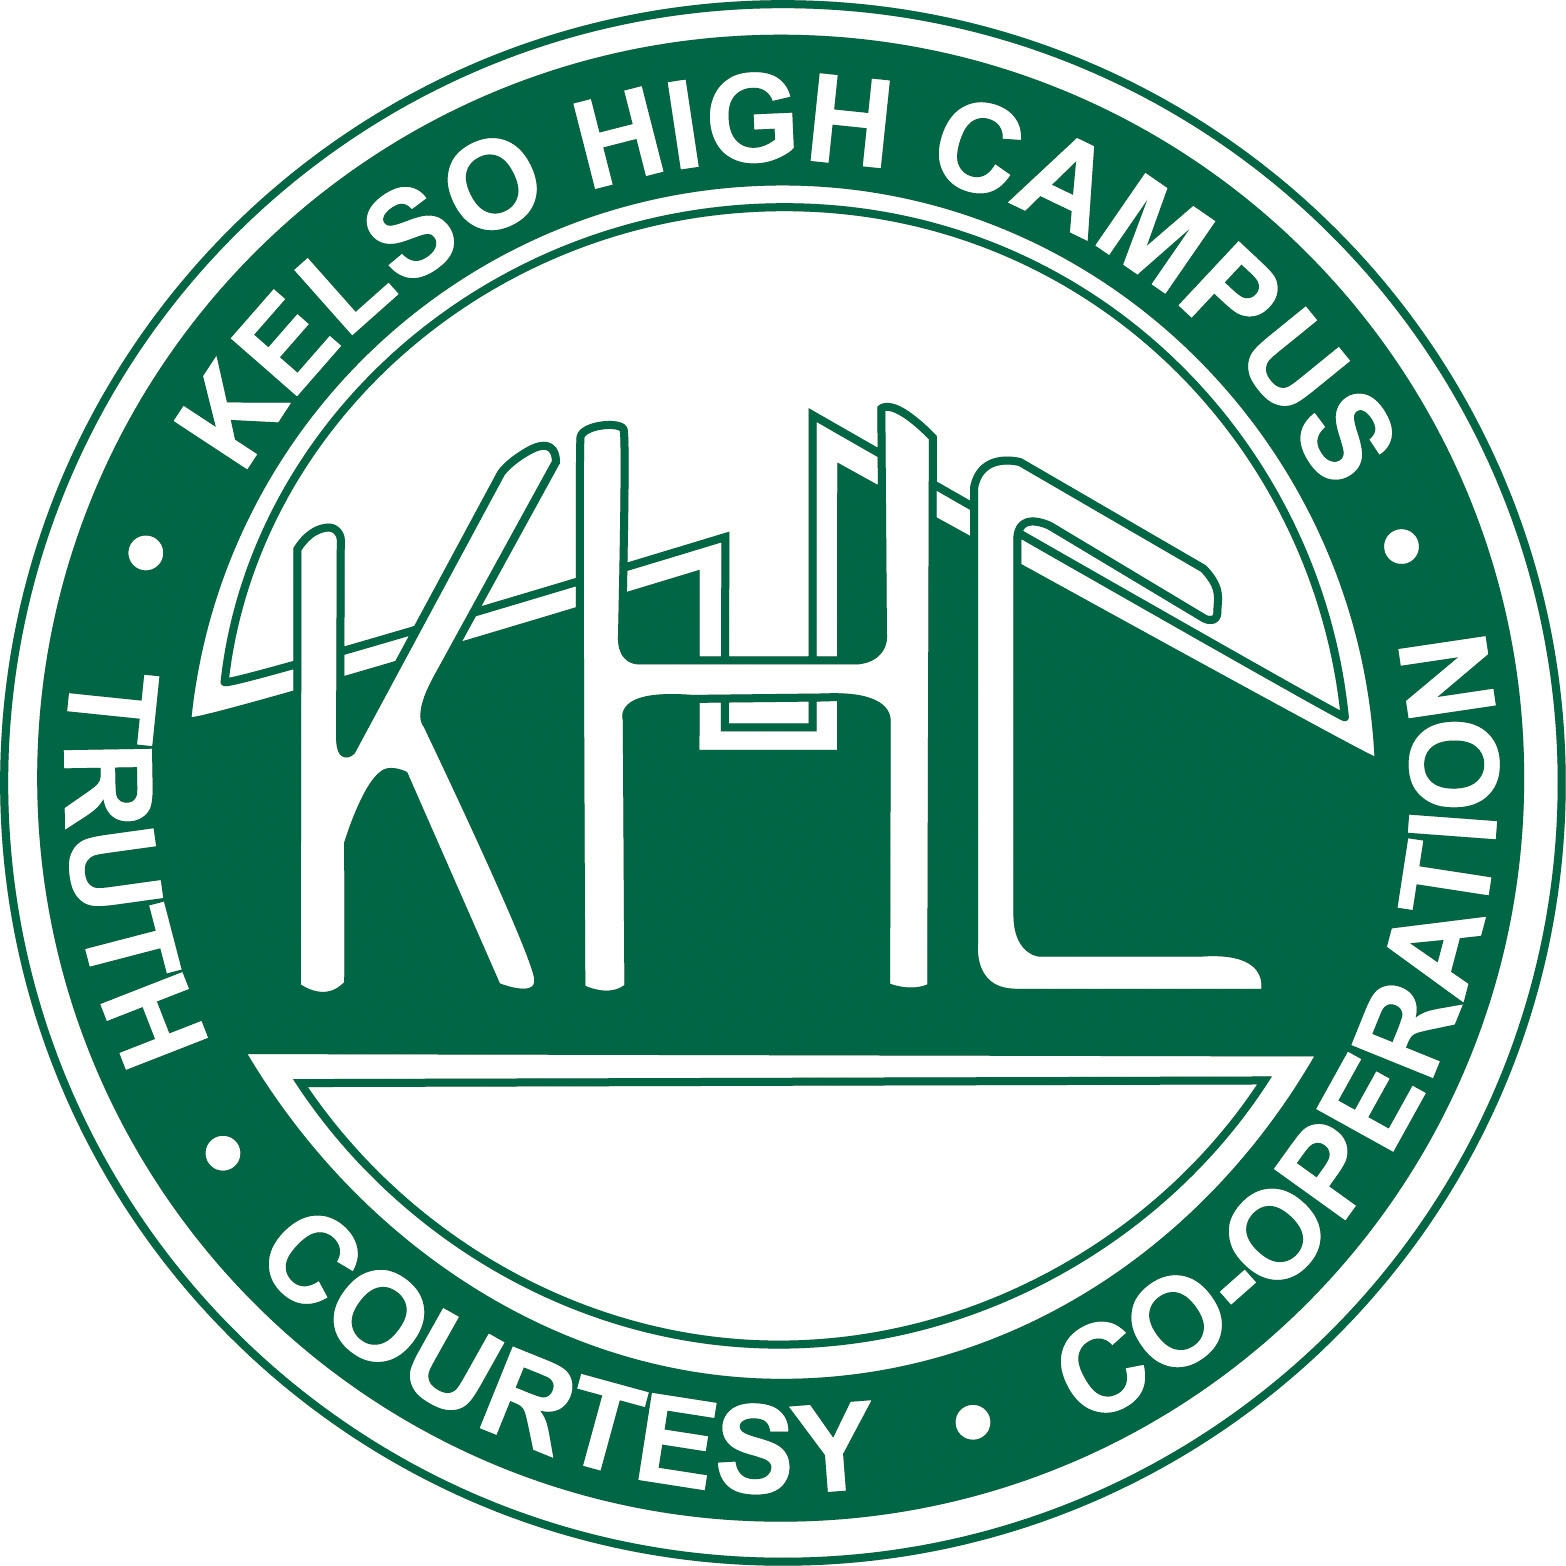 Denison College of Secondary Education: Kelso High Campus logo